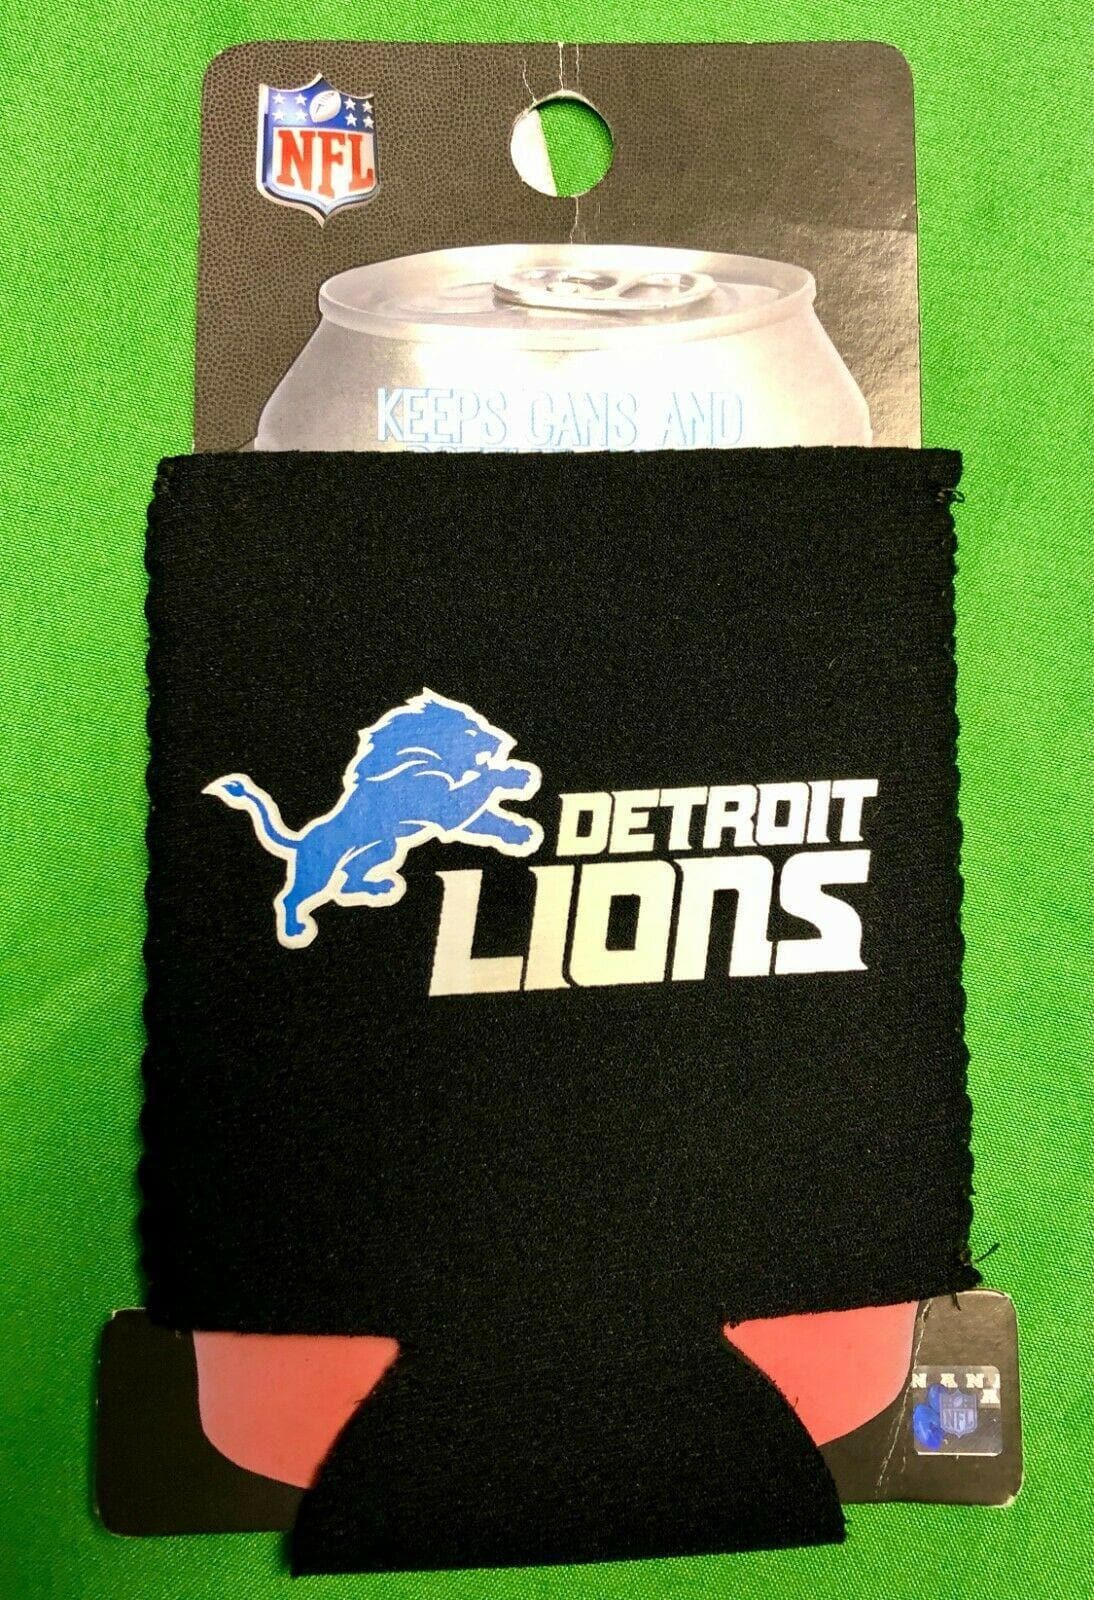 NFL Detroit Lions Beer Jacket - Cosy Insulator NWT